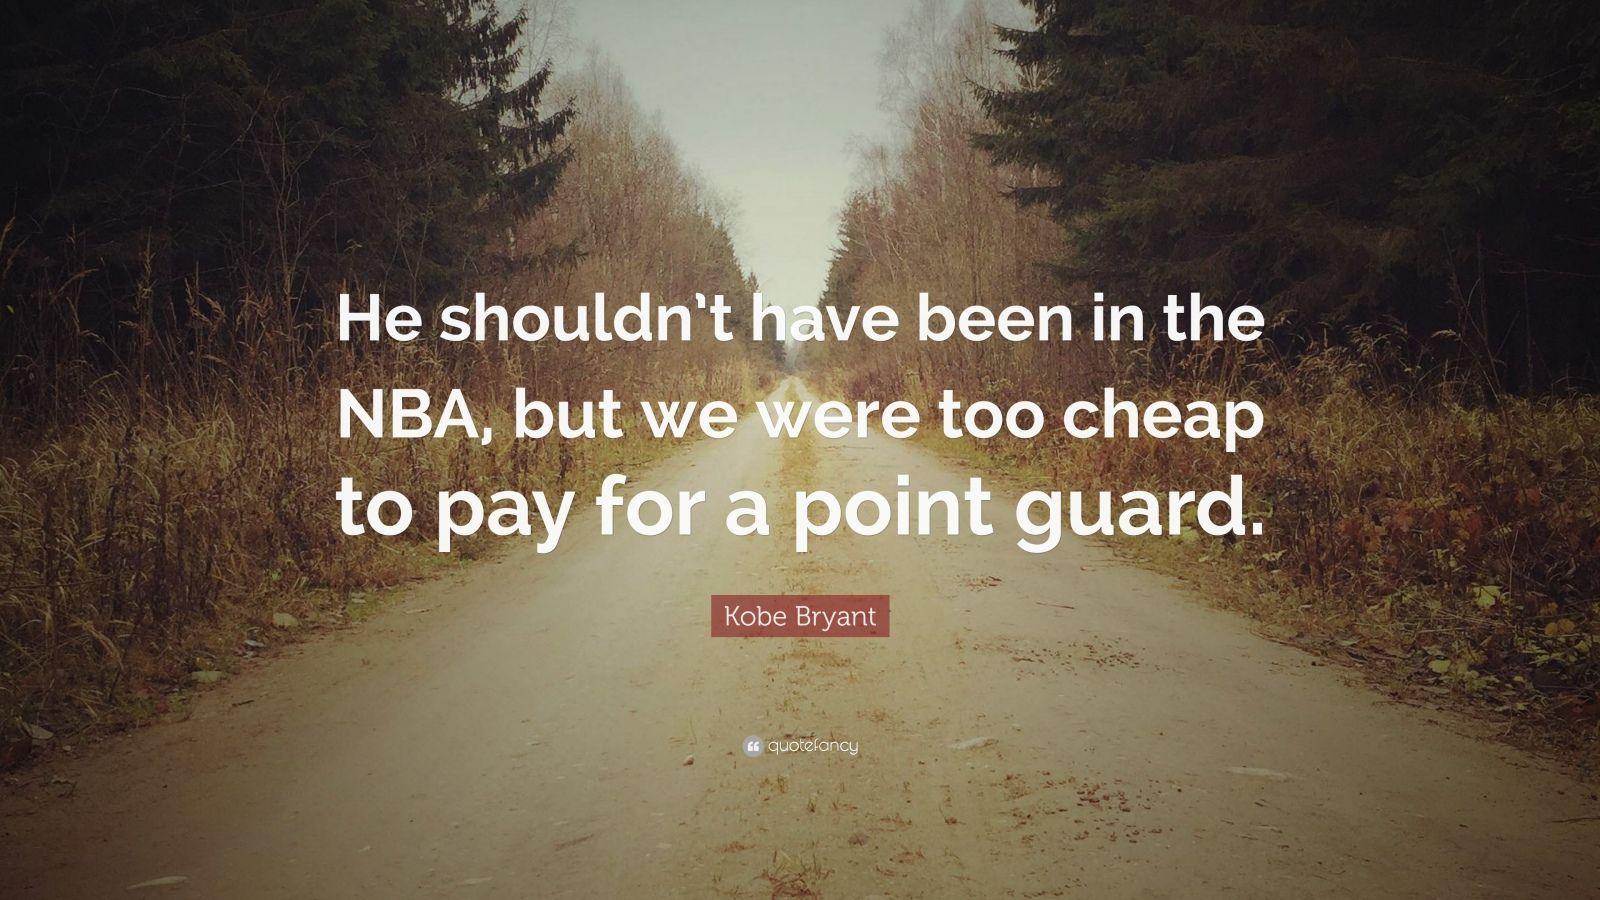 Kobe Bryant Quote: “He shouldn't have been in the NBA, but